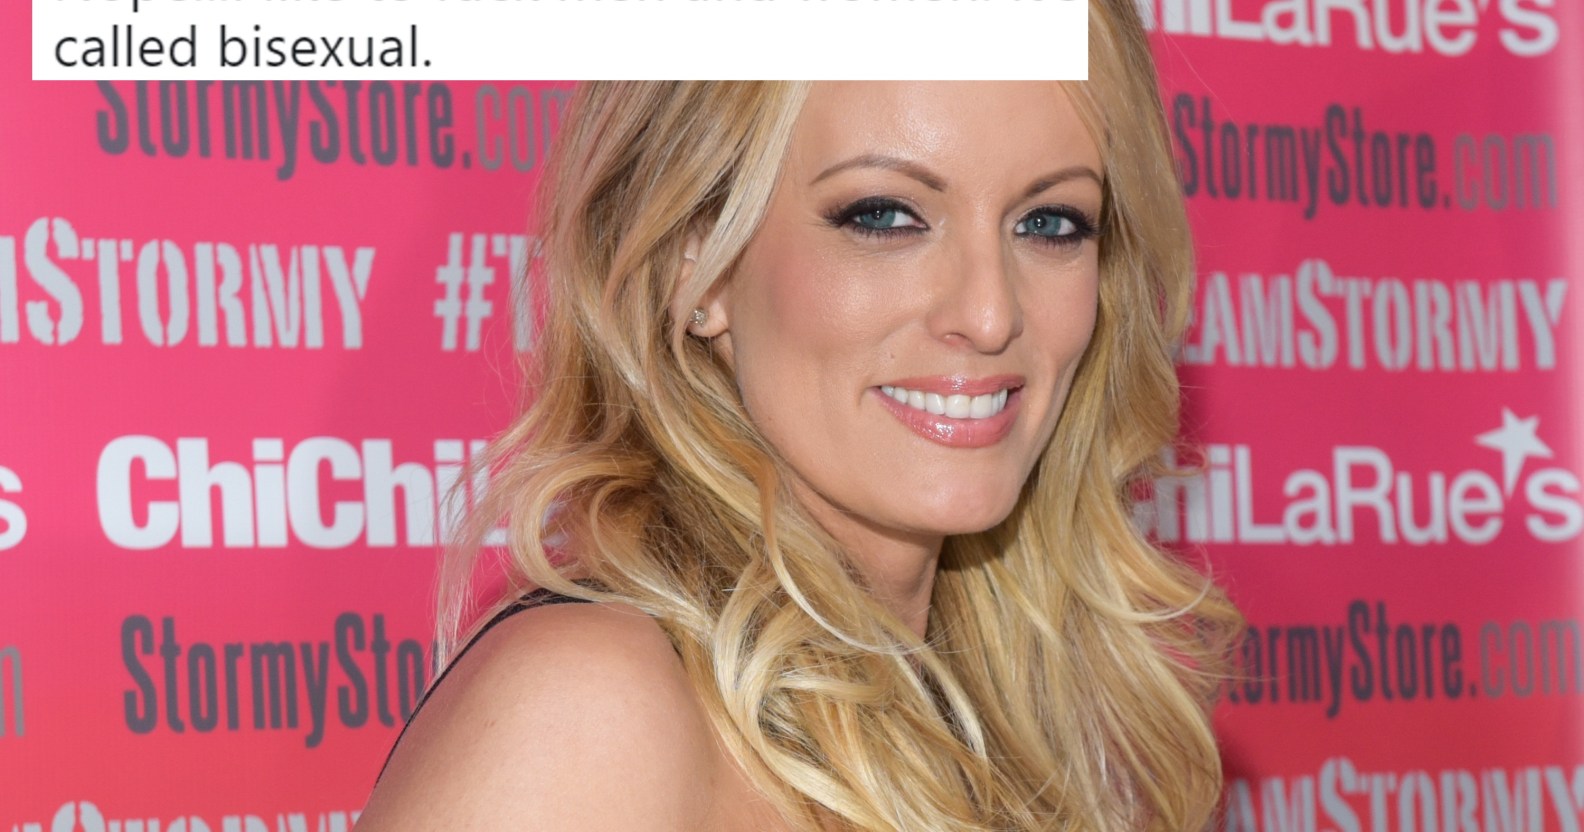 1584px x 832px - Stormy Daniels comes out as bisexual in fiery Twitter argument | PinkNews